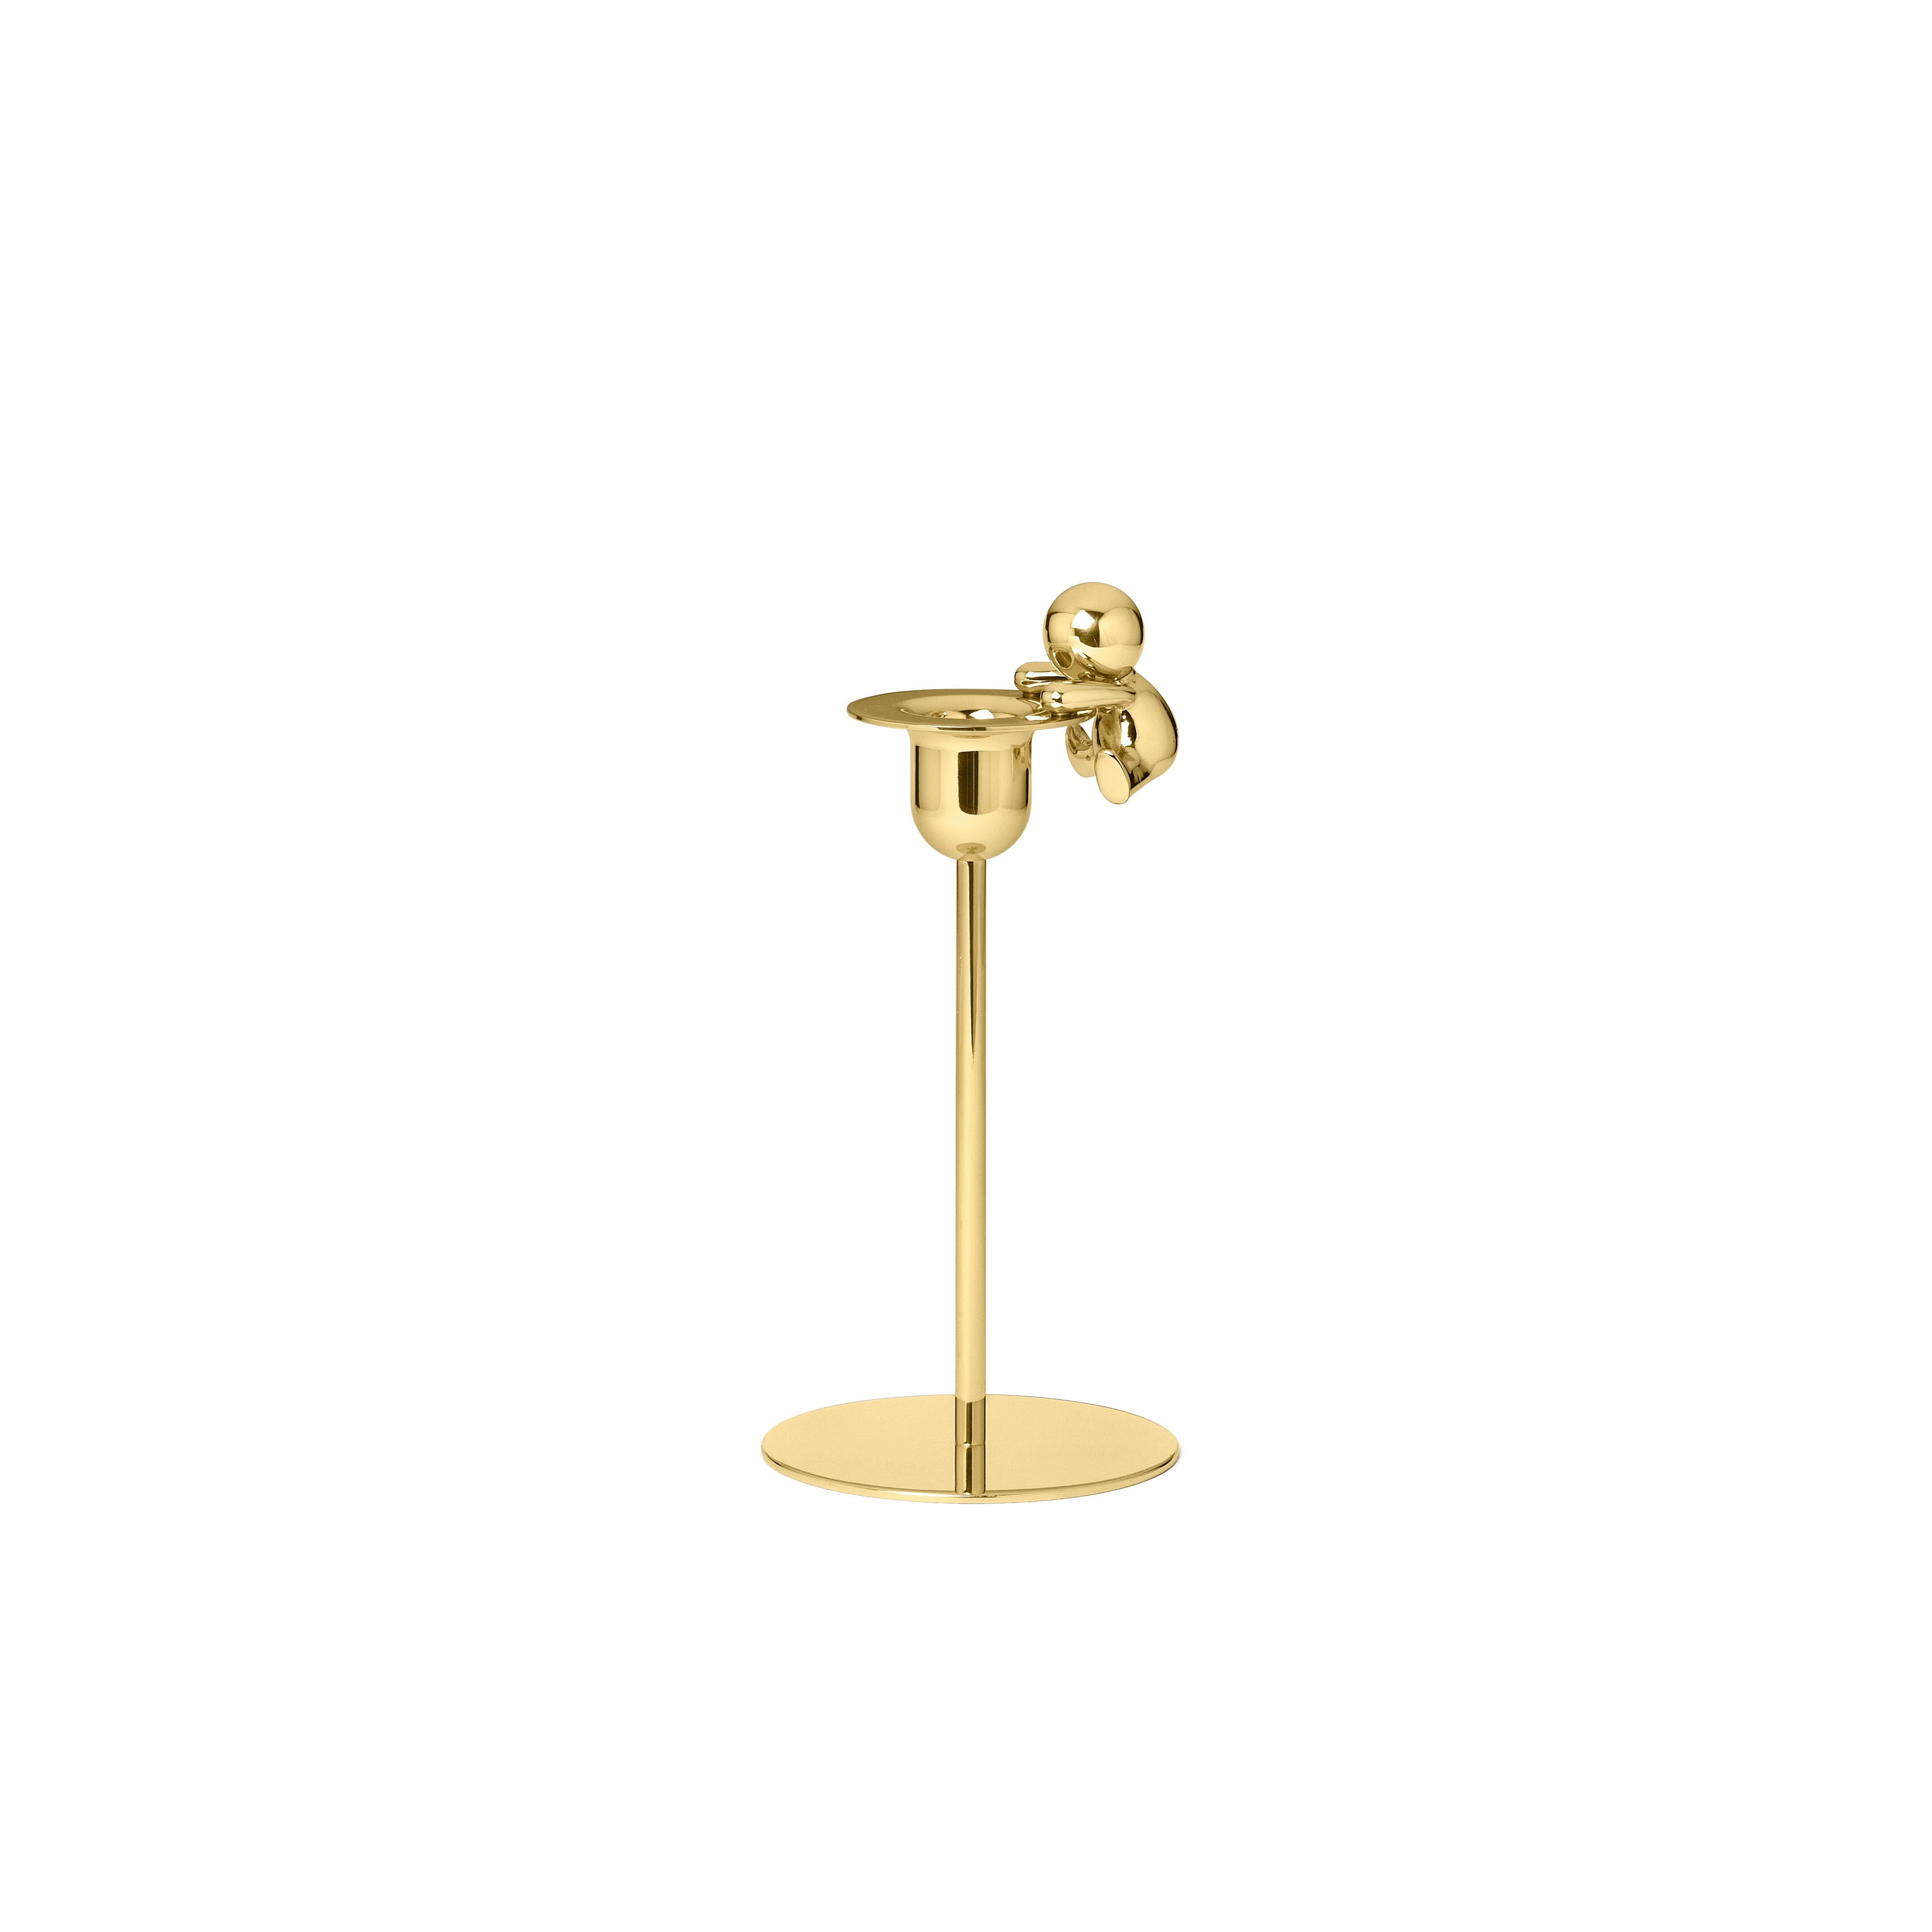 Candleholder in brass.
Omini is a family of products that plays on the inclusion and the relationship between the human figure with a series of monolithic objects from geometric and Minimalist design. Small Lilliputians attack and animate the pure